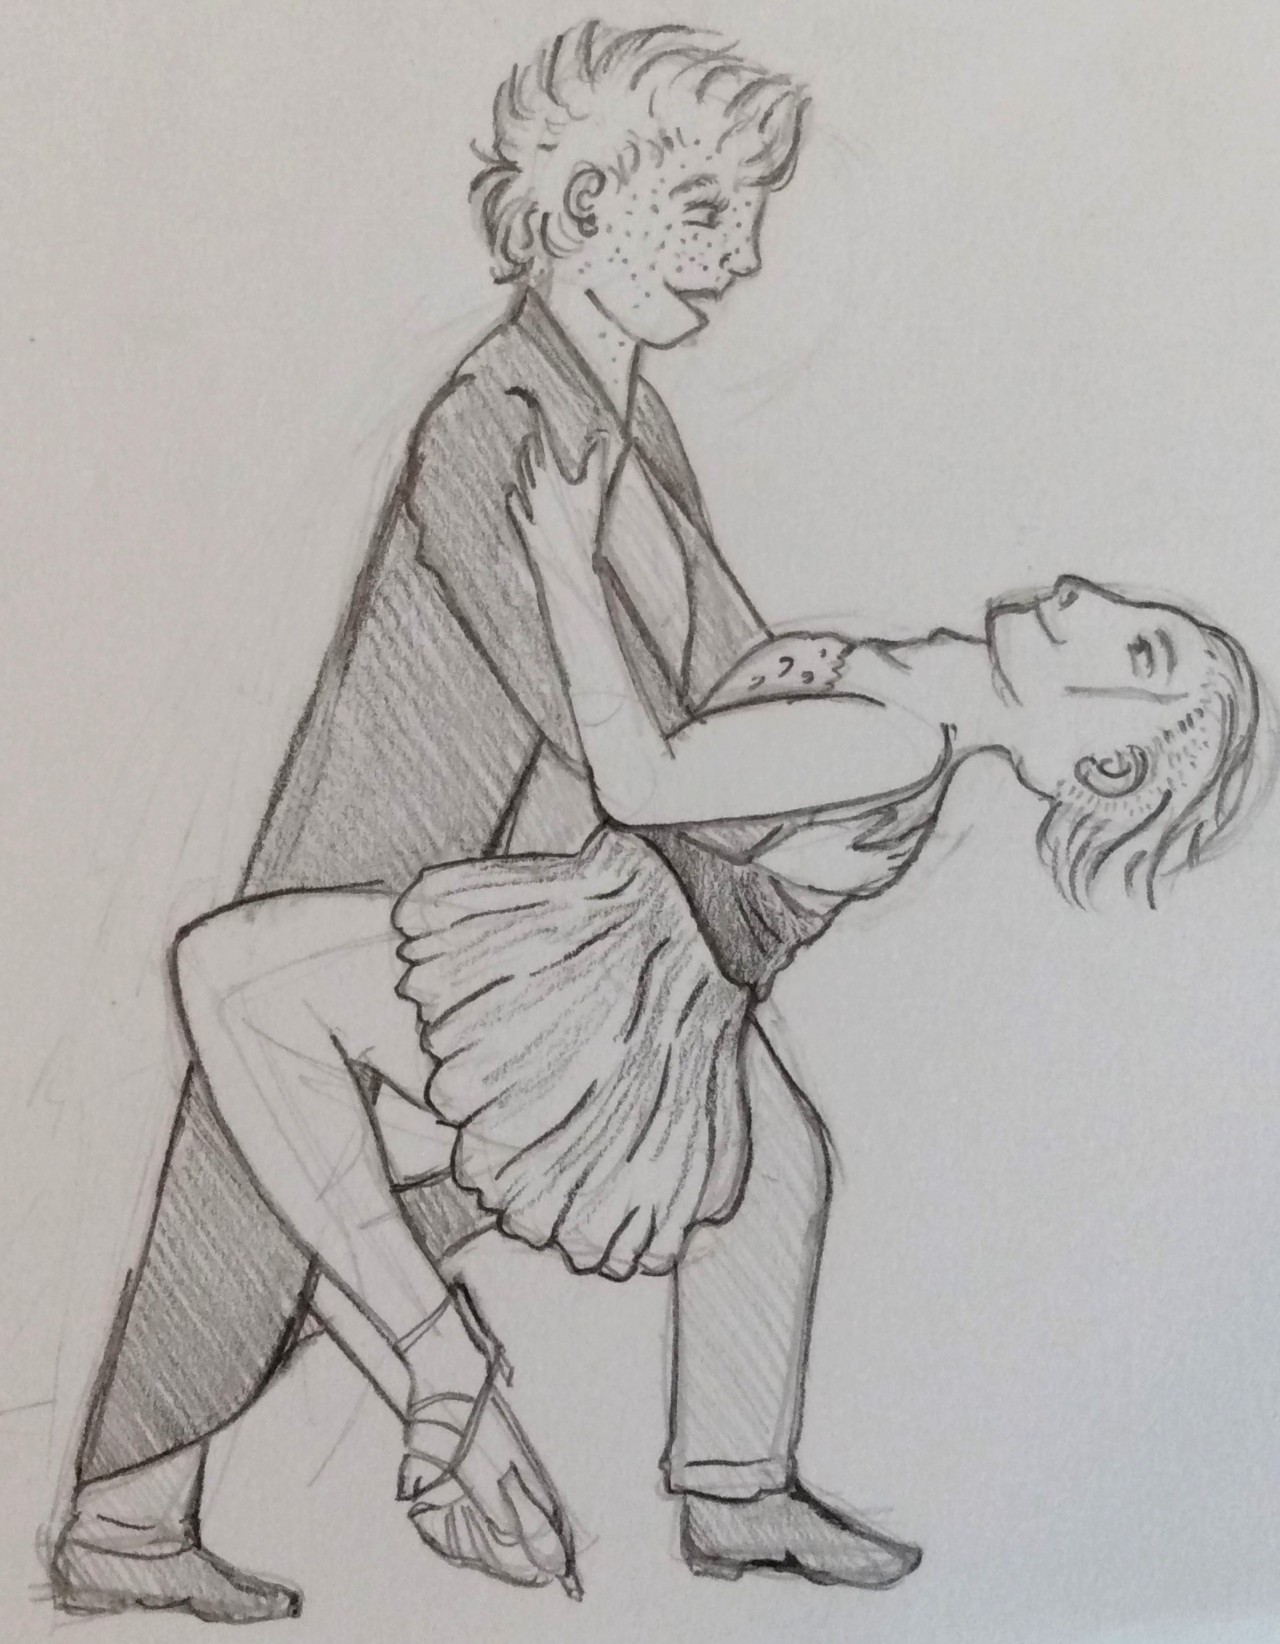 A pencil drawing of Draco and Ginny. Ginny dips Draco in a dance move. She has short hair and is wearing dress robes. Draco is in a coctail dress and short heels. They are grinning at each other.